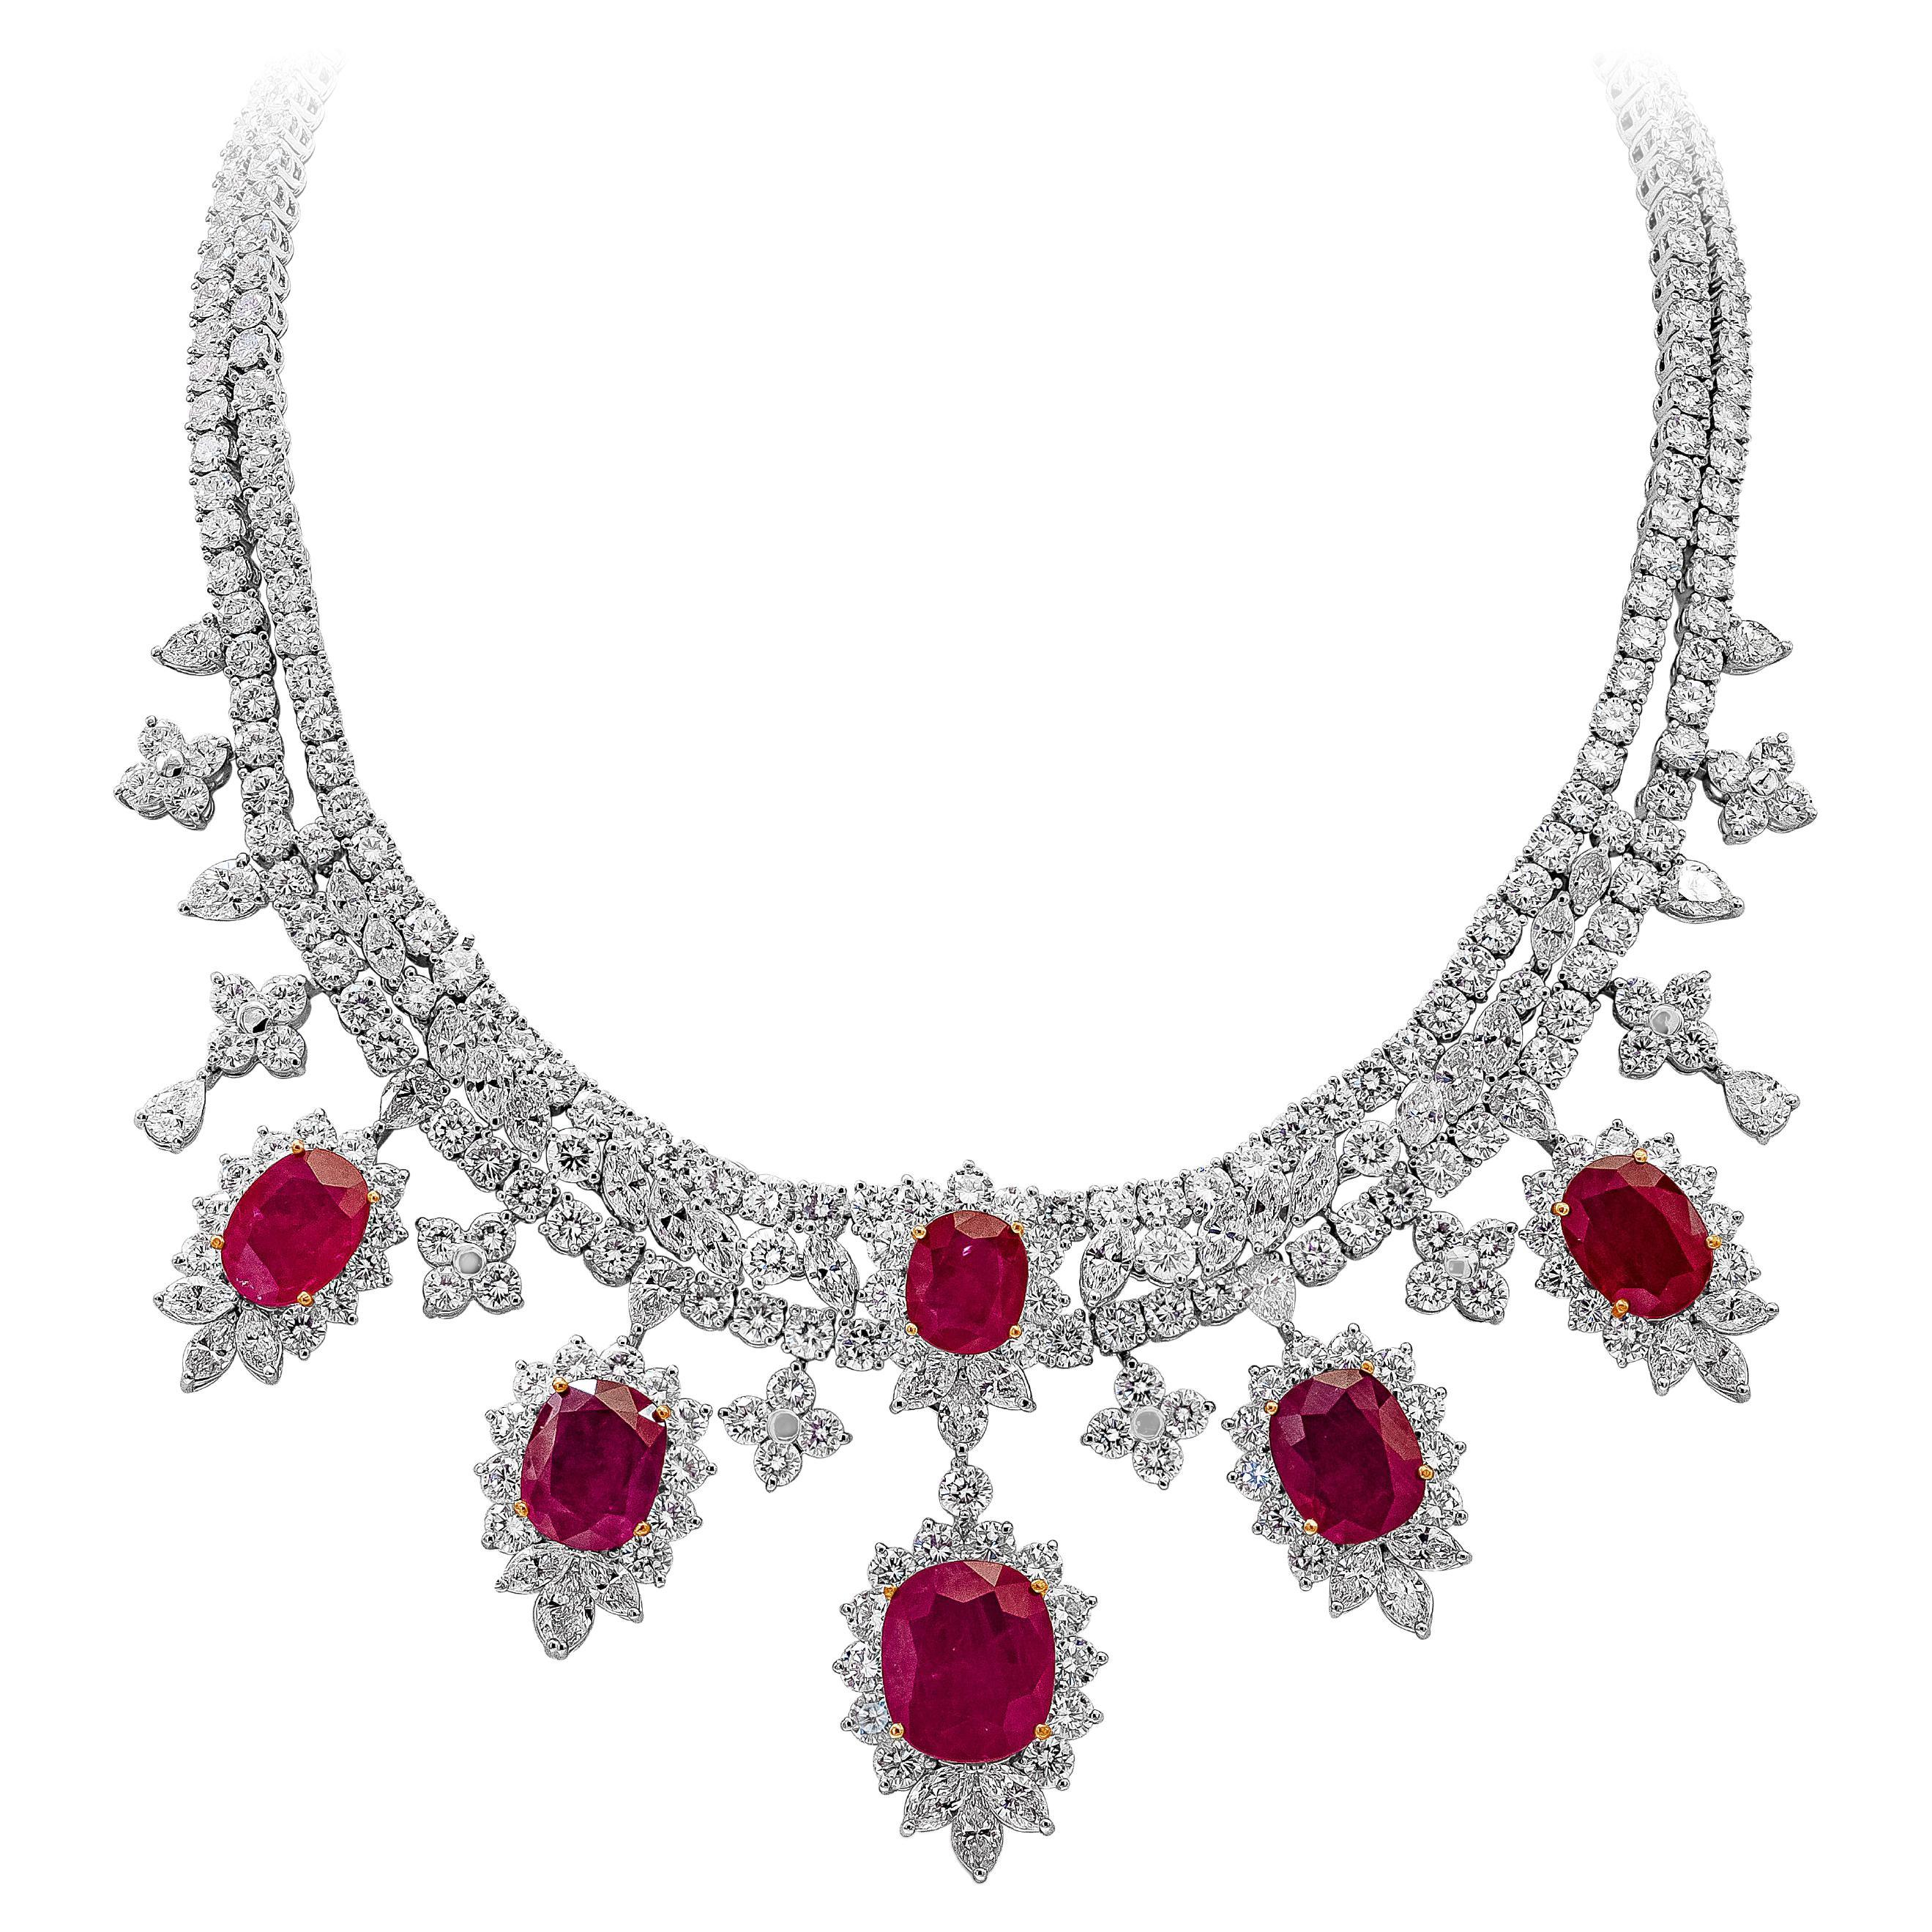 Roman Malakov, Oval Cut Ruby and Diamond Necklace in 18k White Gold at ...